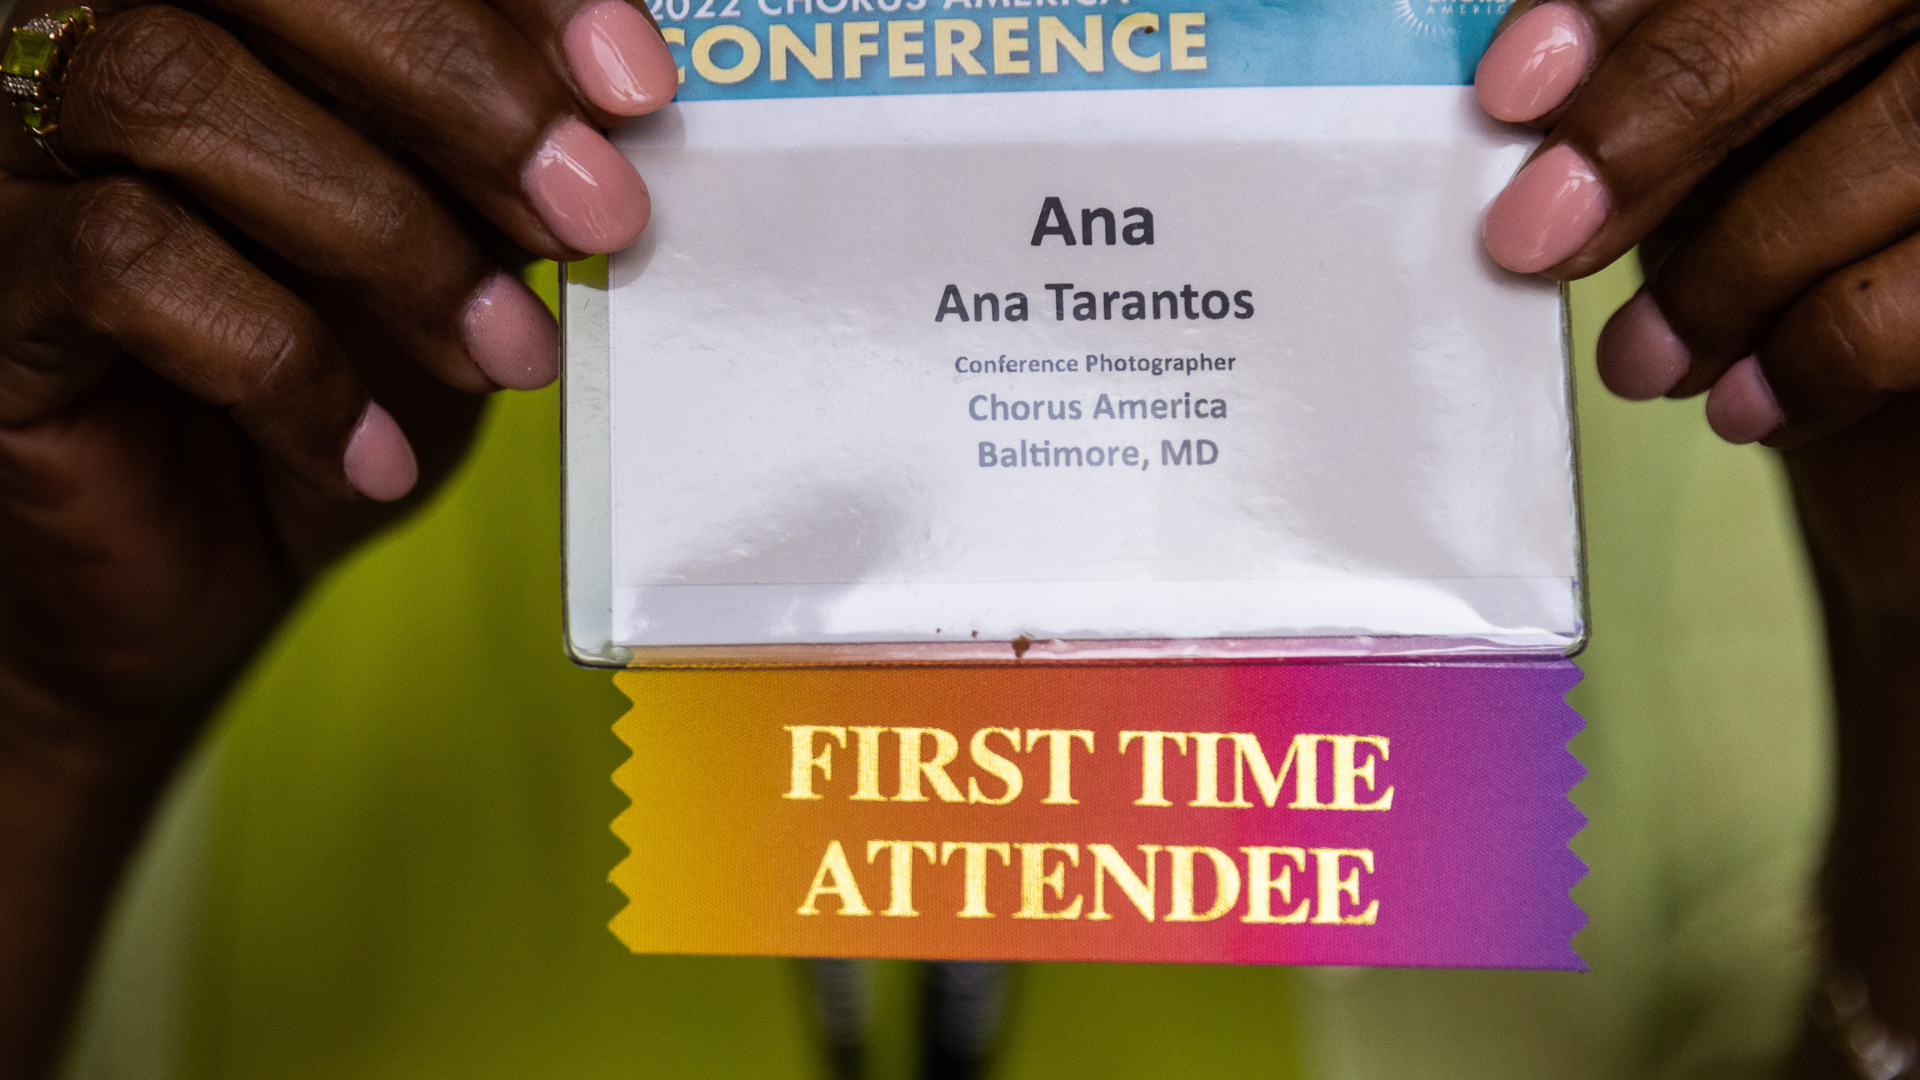 Close up photo of hands holding a rainbow colored name tag with "First Time Conference Attendee" embossed in gold